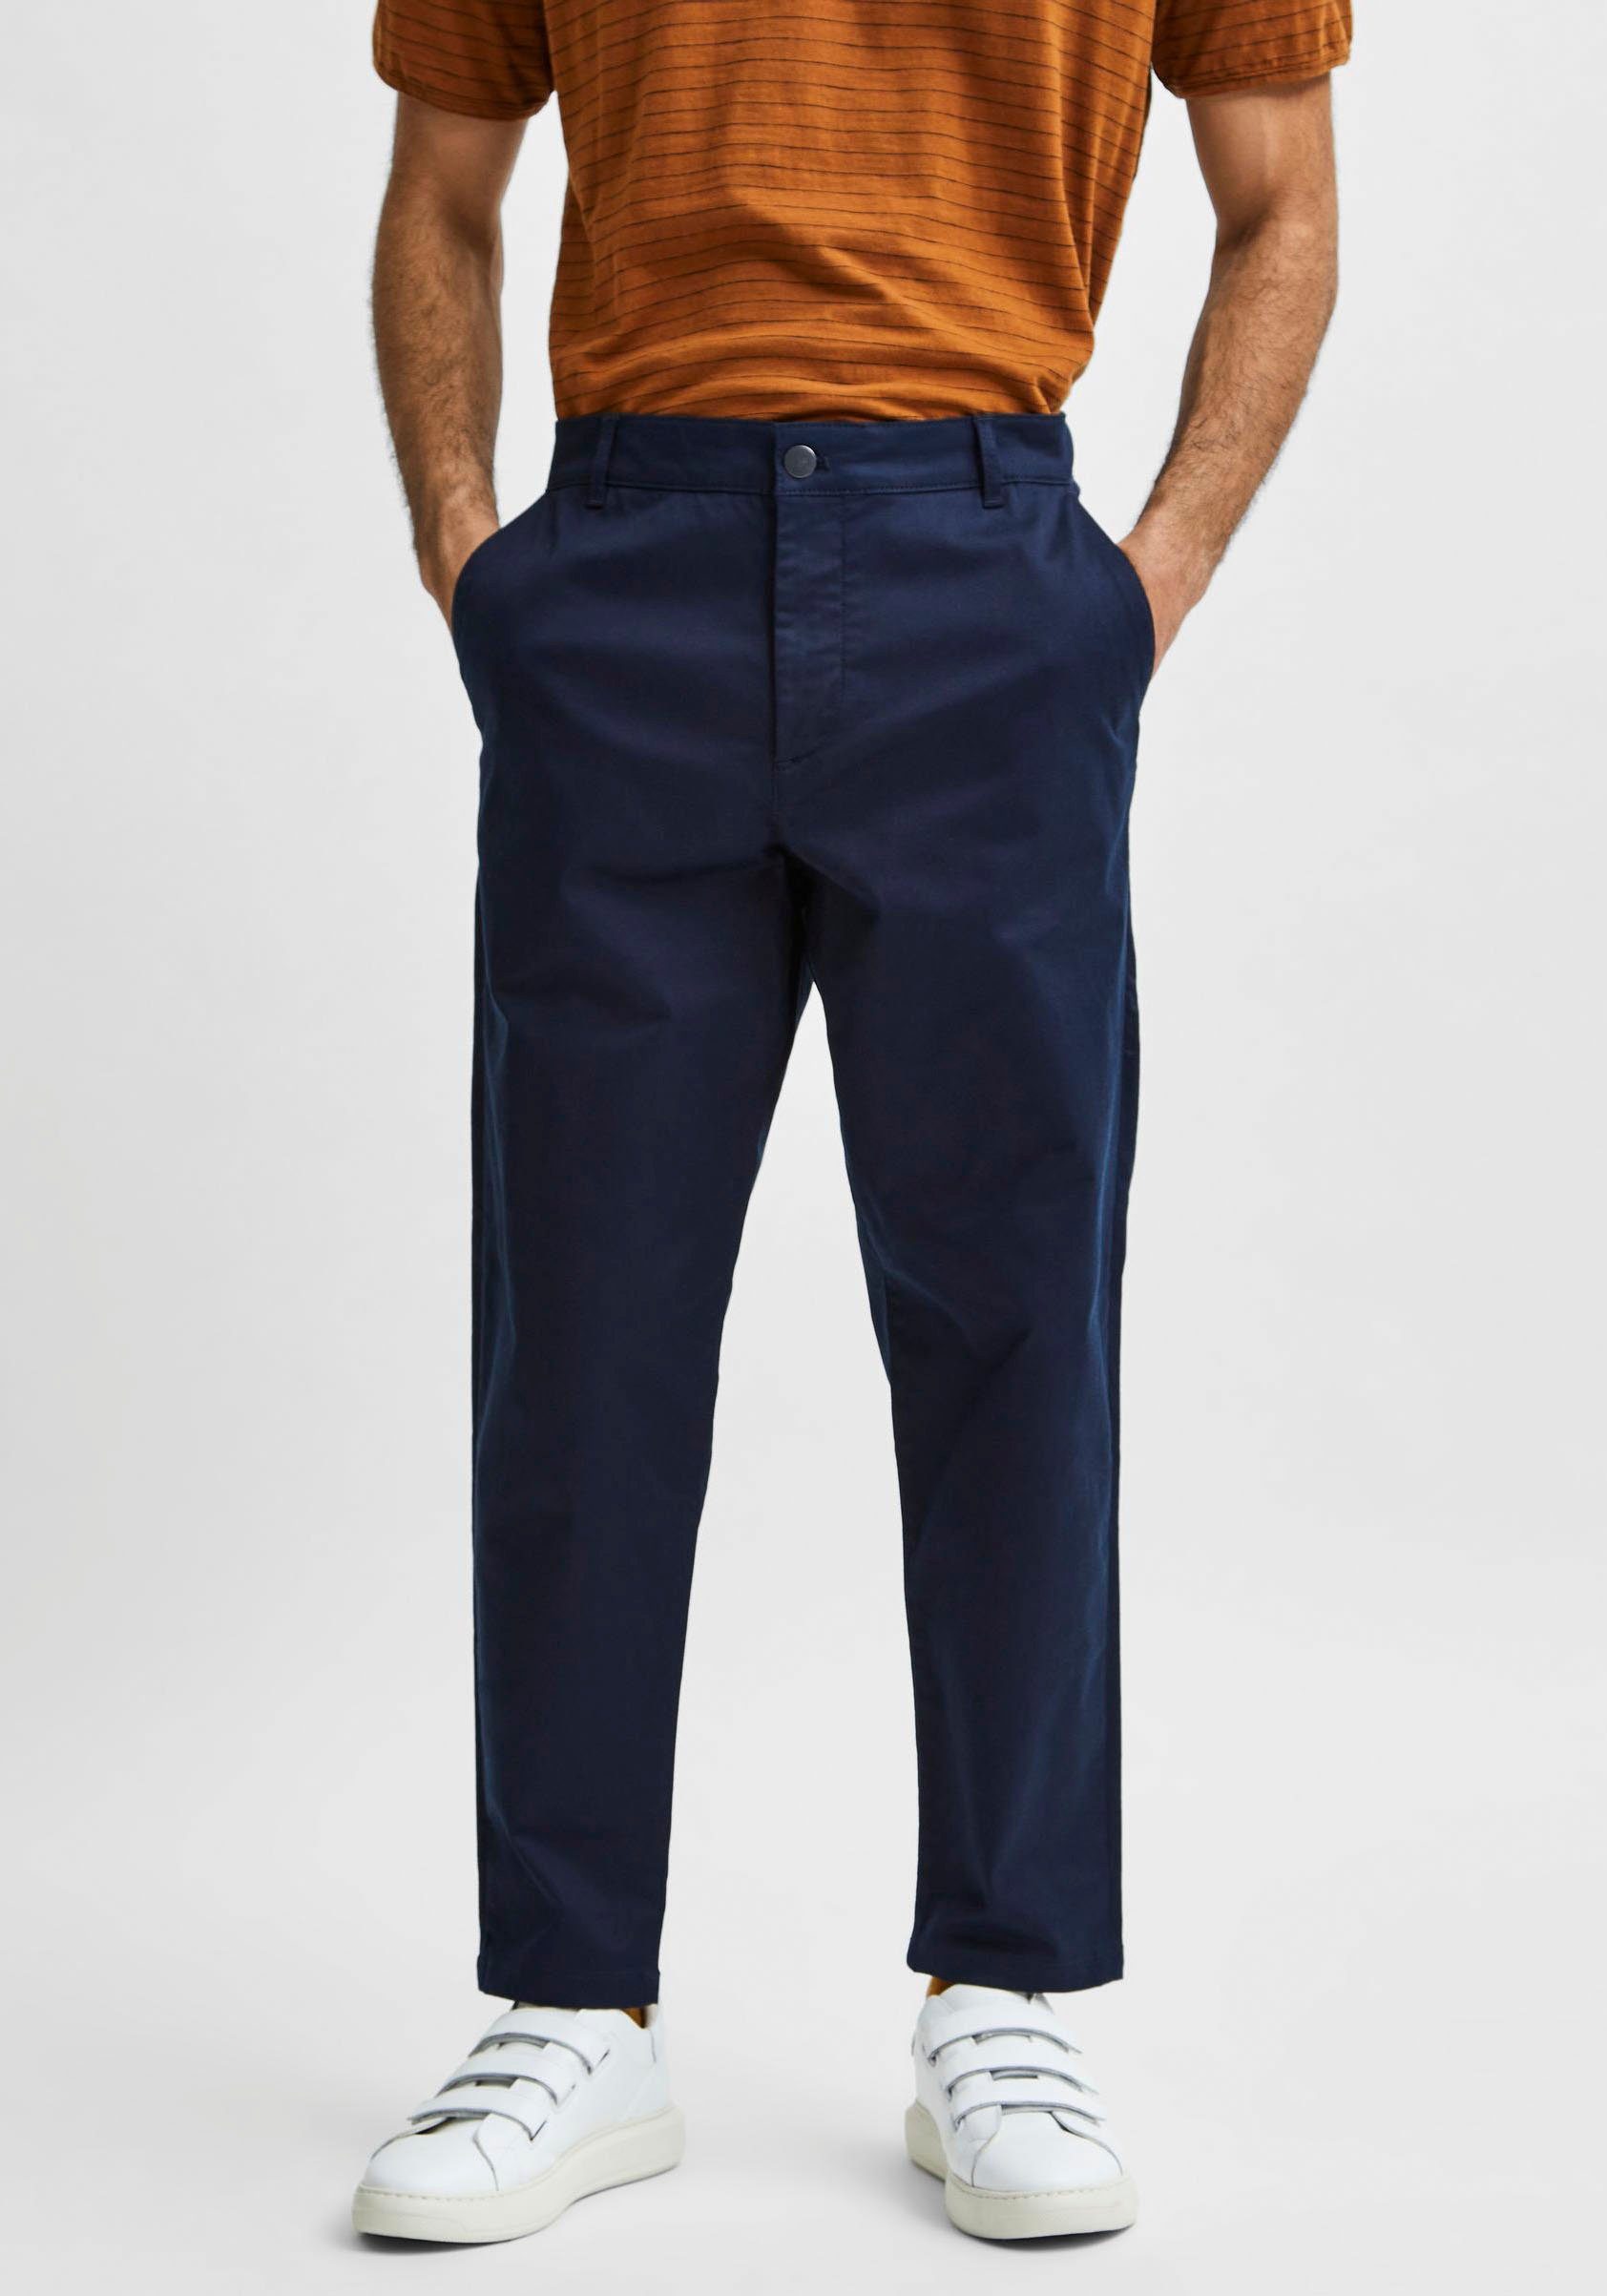 Chinohose Sapphire SELECTED HOMME PANTS Dark REPTON FLEX